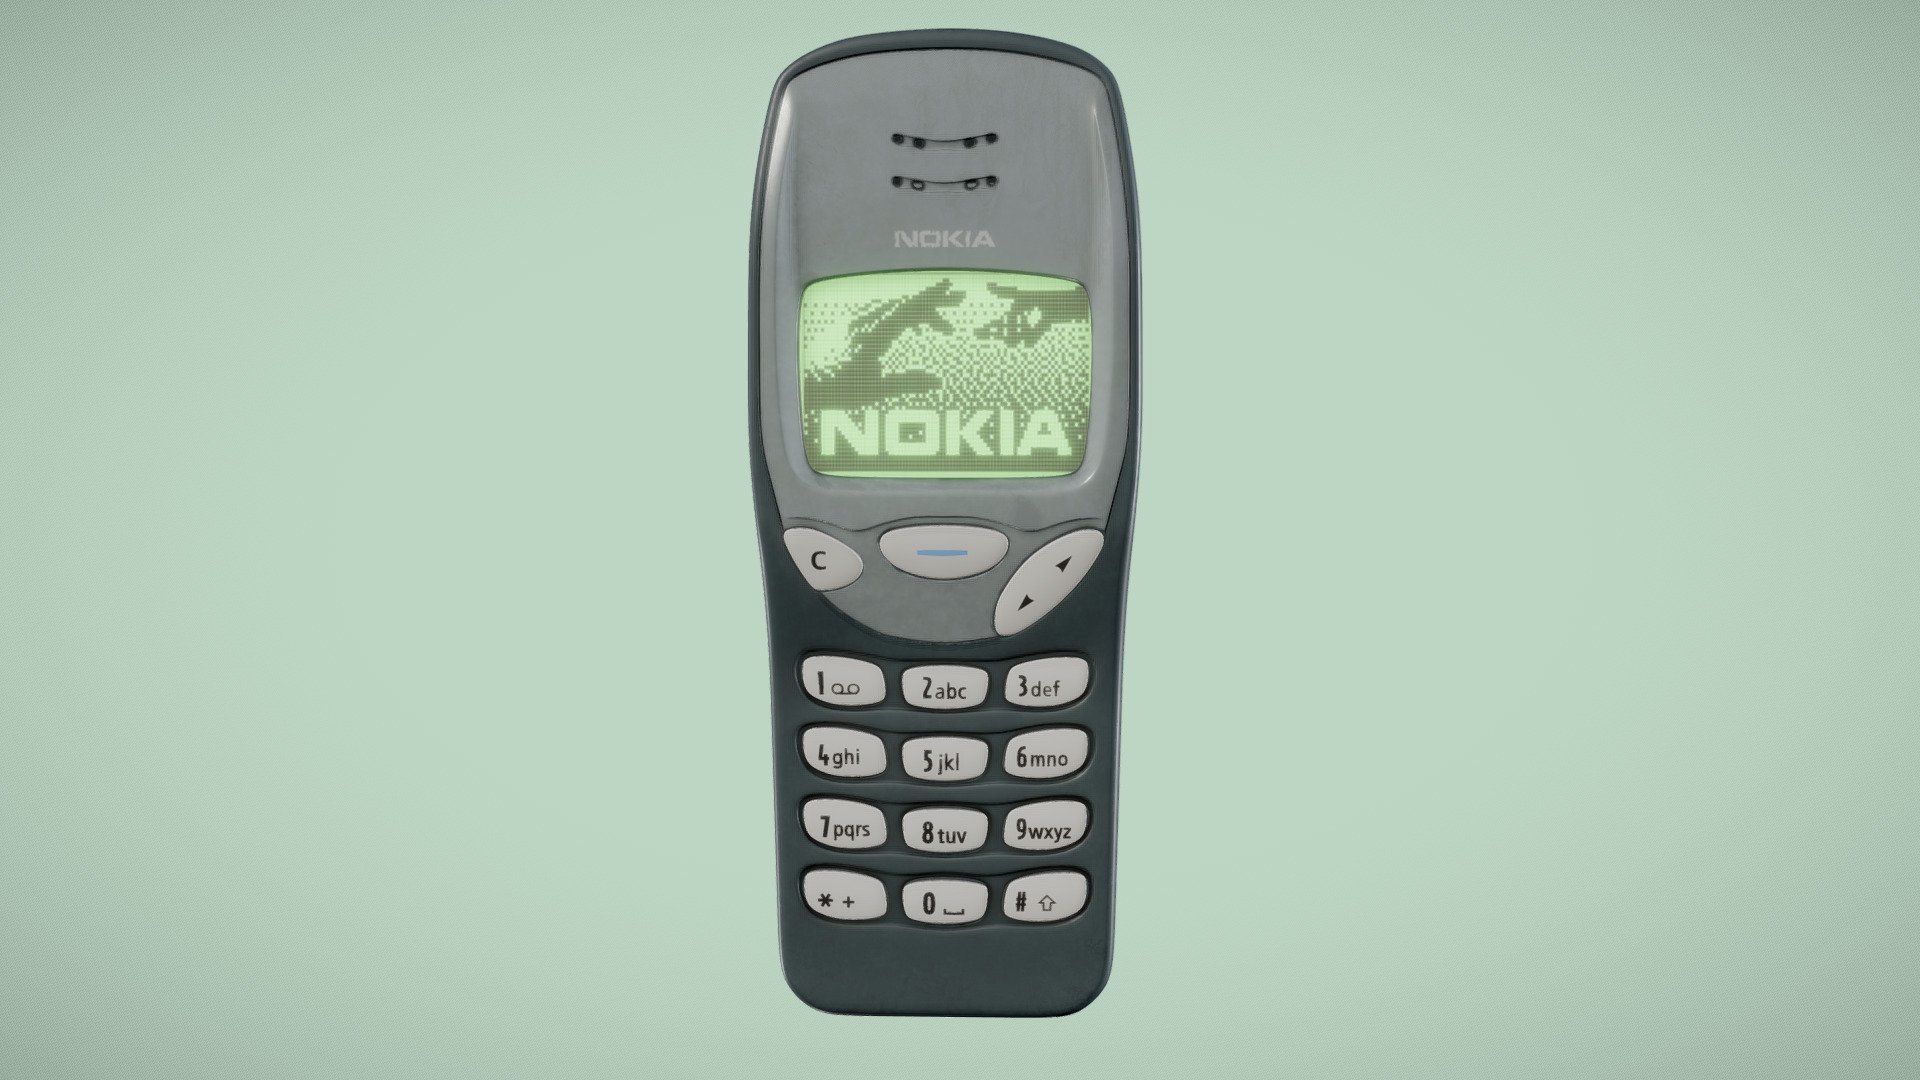 3D model of Nokia 3210 cell phone. Product dimensions: LWH 127,77 x 49,26 x 21,36 mm (4,94 x 1,91 x 0,84 in).

MODEL
* Model is scaled to proper real world dimensions. Scene units are in mm.
* Materials are prepared for Corona, V-ray and Scanline renderers.
* Objects and materials folows the same name convention for easy scene managment.
* Transformations has been reset and model is placed at scene origin [0, 0, 0 XYZ].
* File formats - MAX, FBX, OBJ



 - Nokia 3210 - Buy Royalty Free 3D model by romullus 3d model